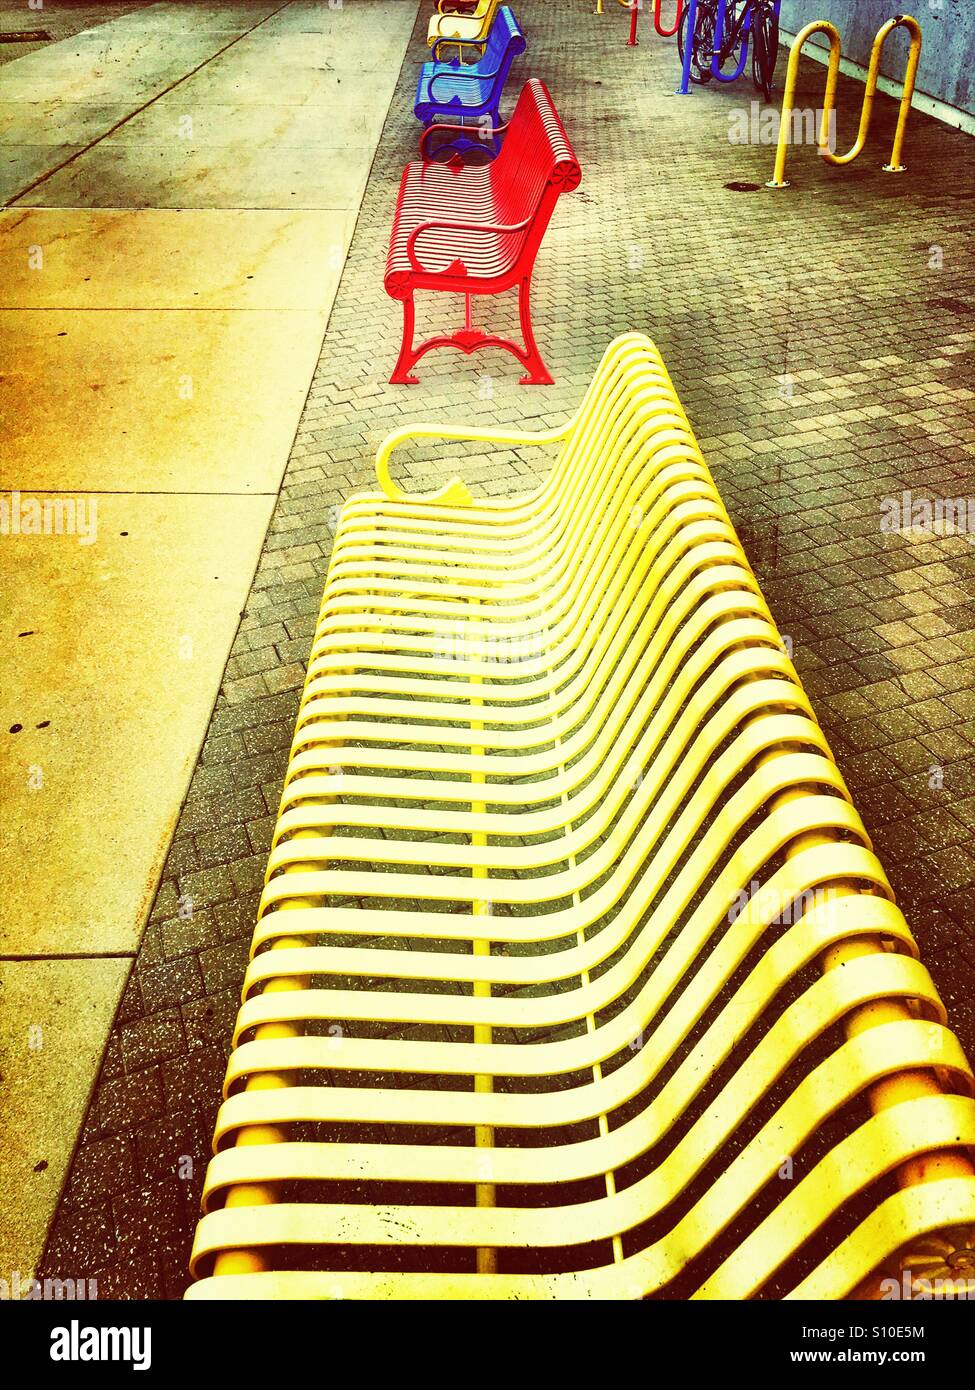 Perspective view of a row of colored benches Stock Photo